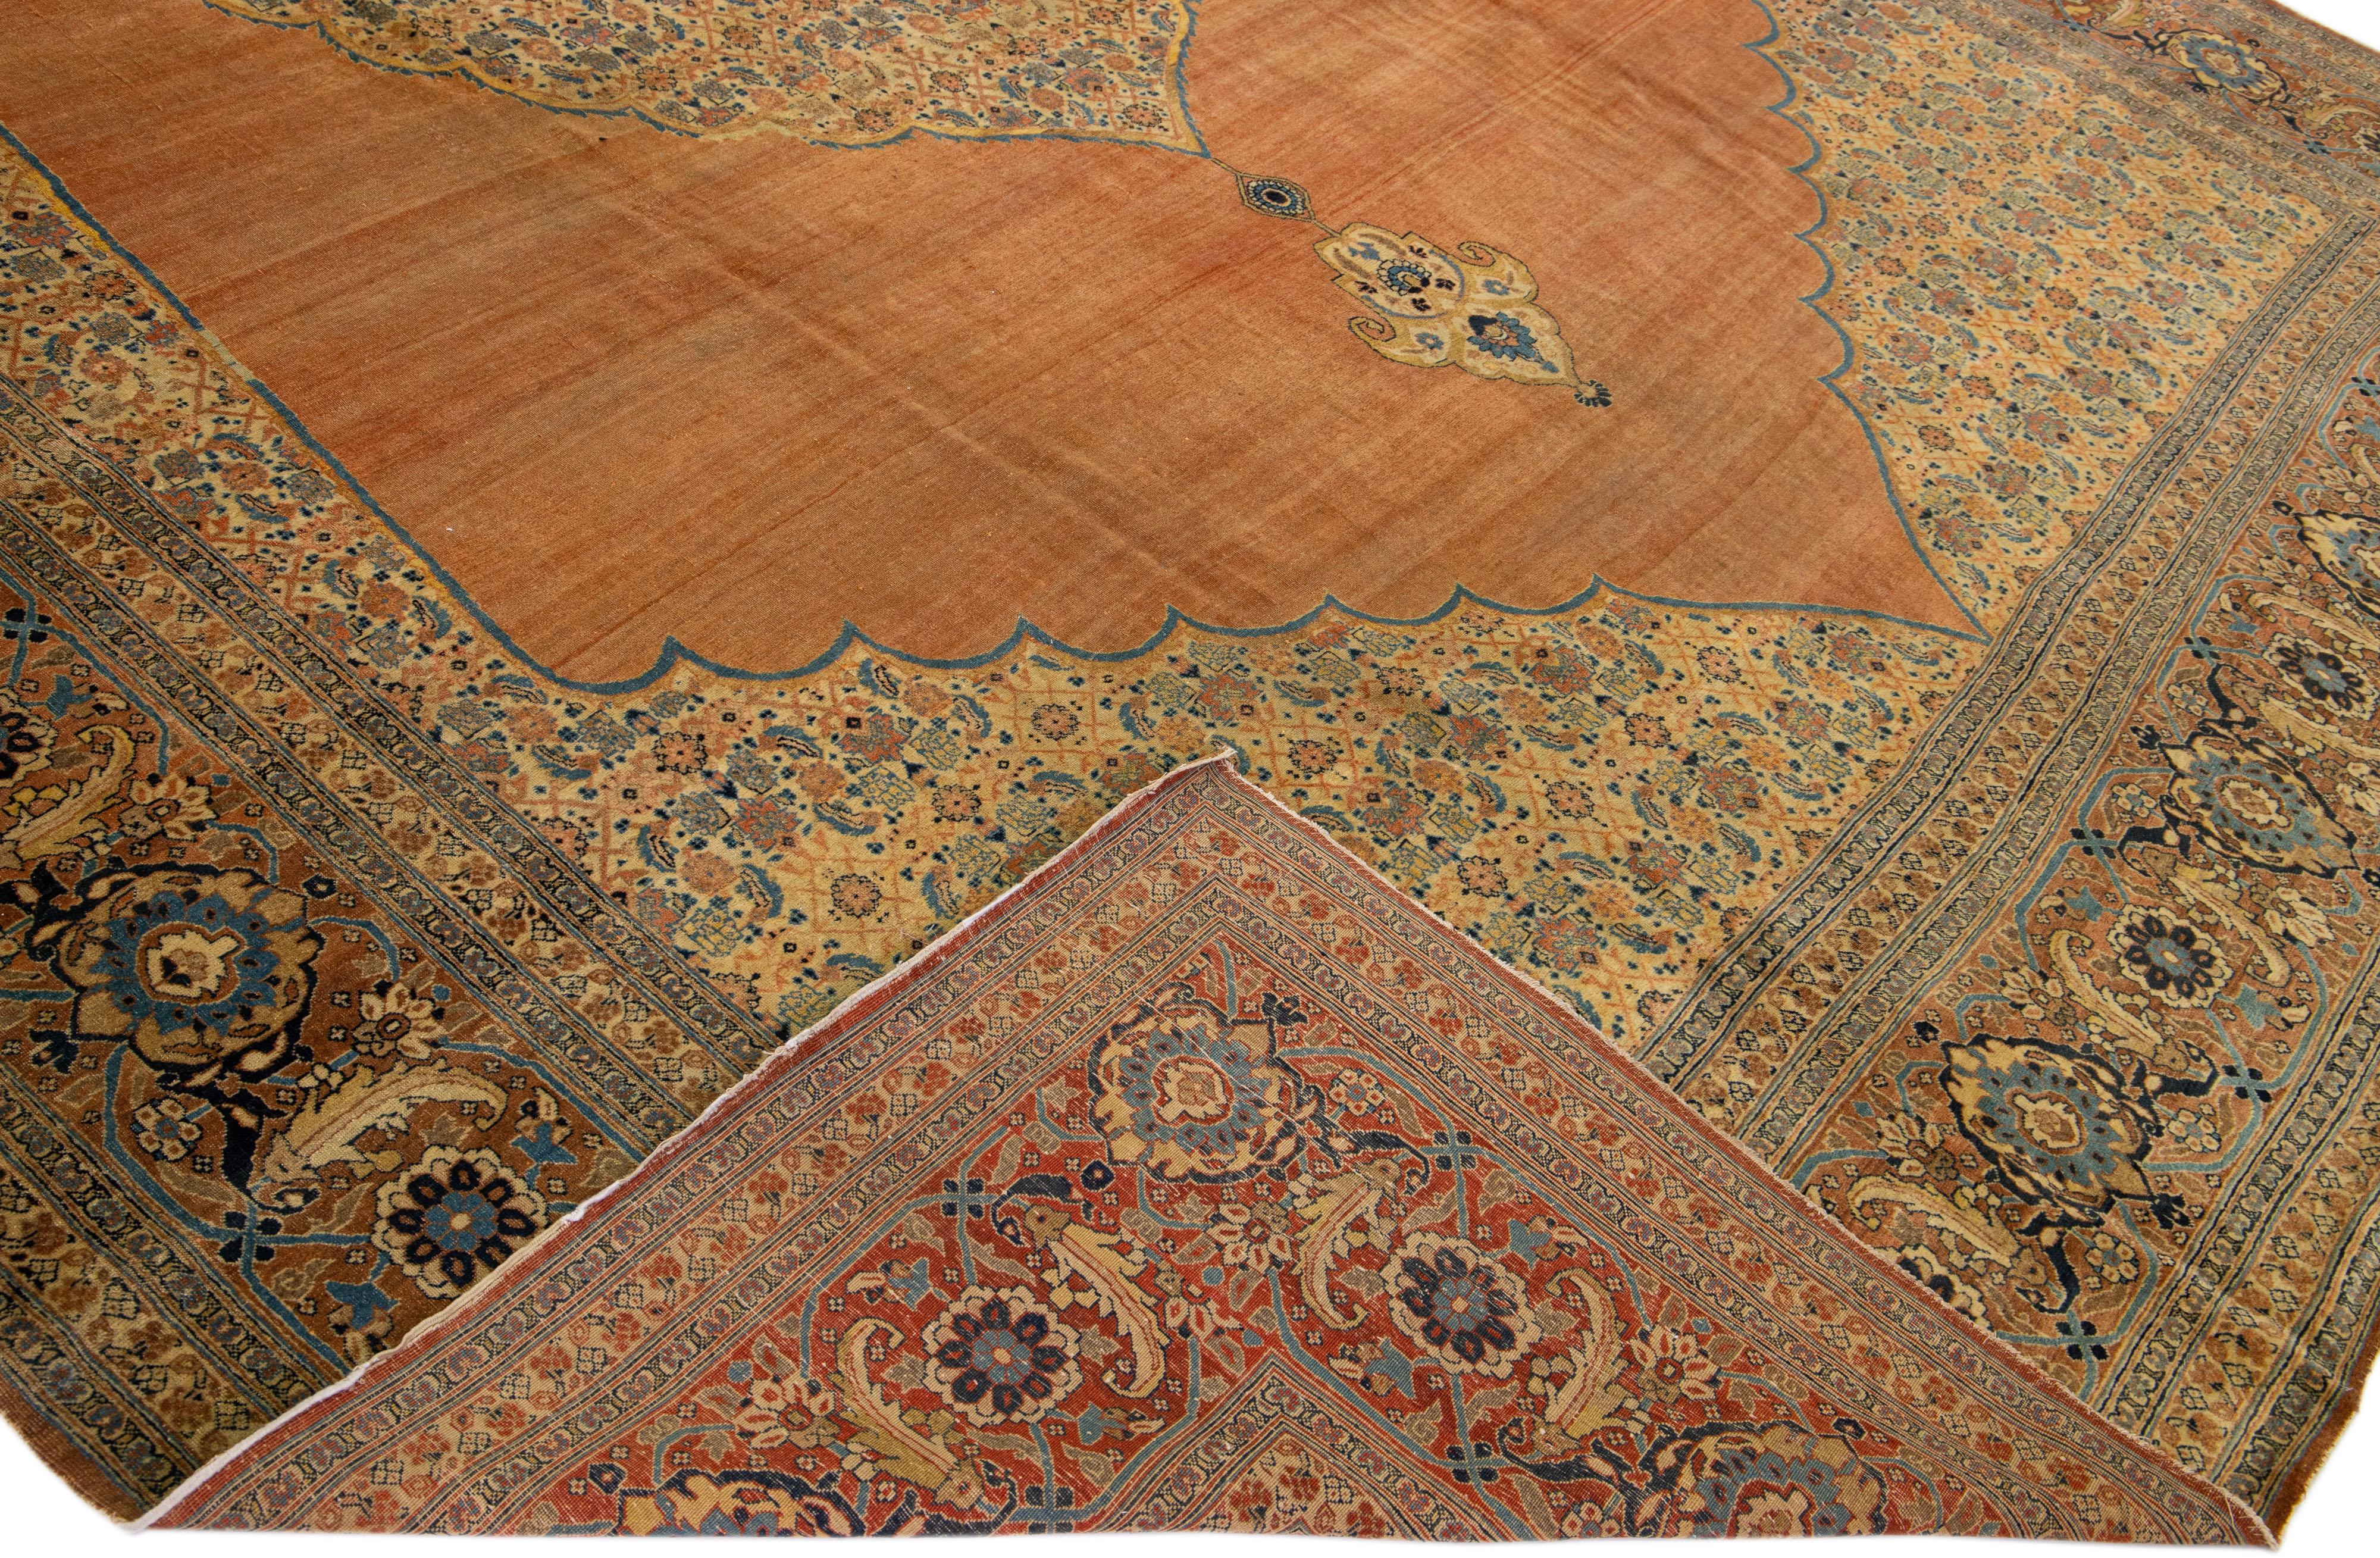 Beautiful Antique Tabriz hand-knotted wool rug with an orange field. This Persian rug has a brown-designed frame with blue accents on a Classic floral medallion design.

This rug measure: 11'2